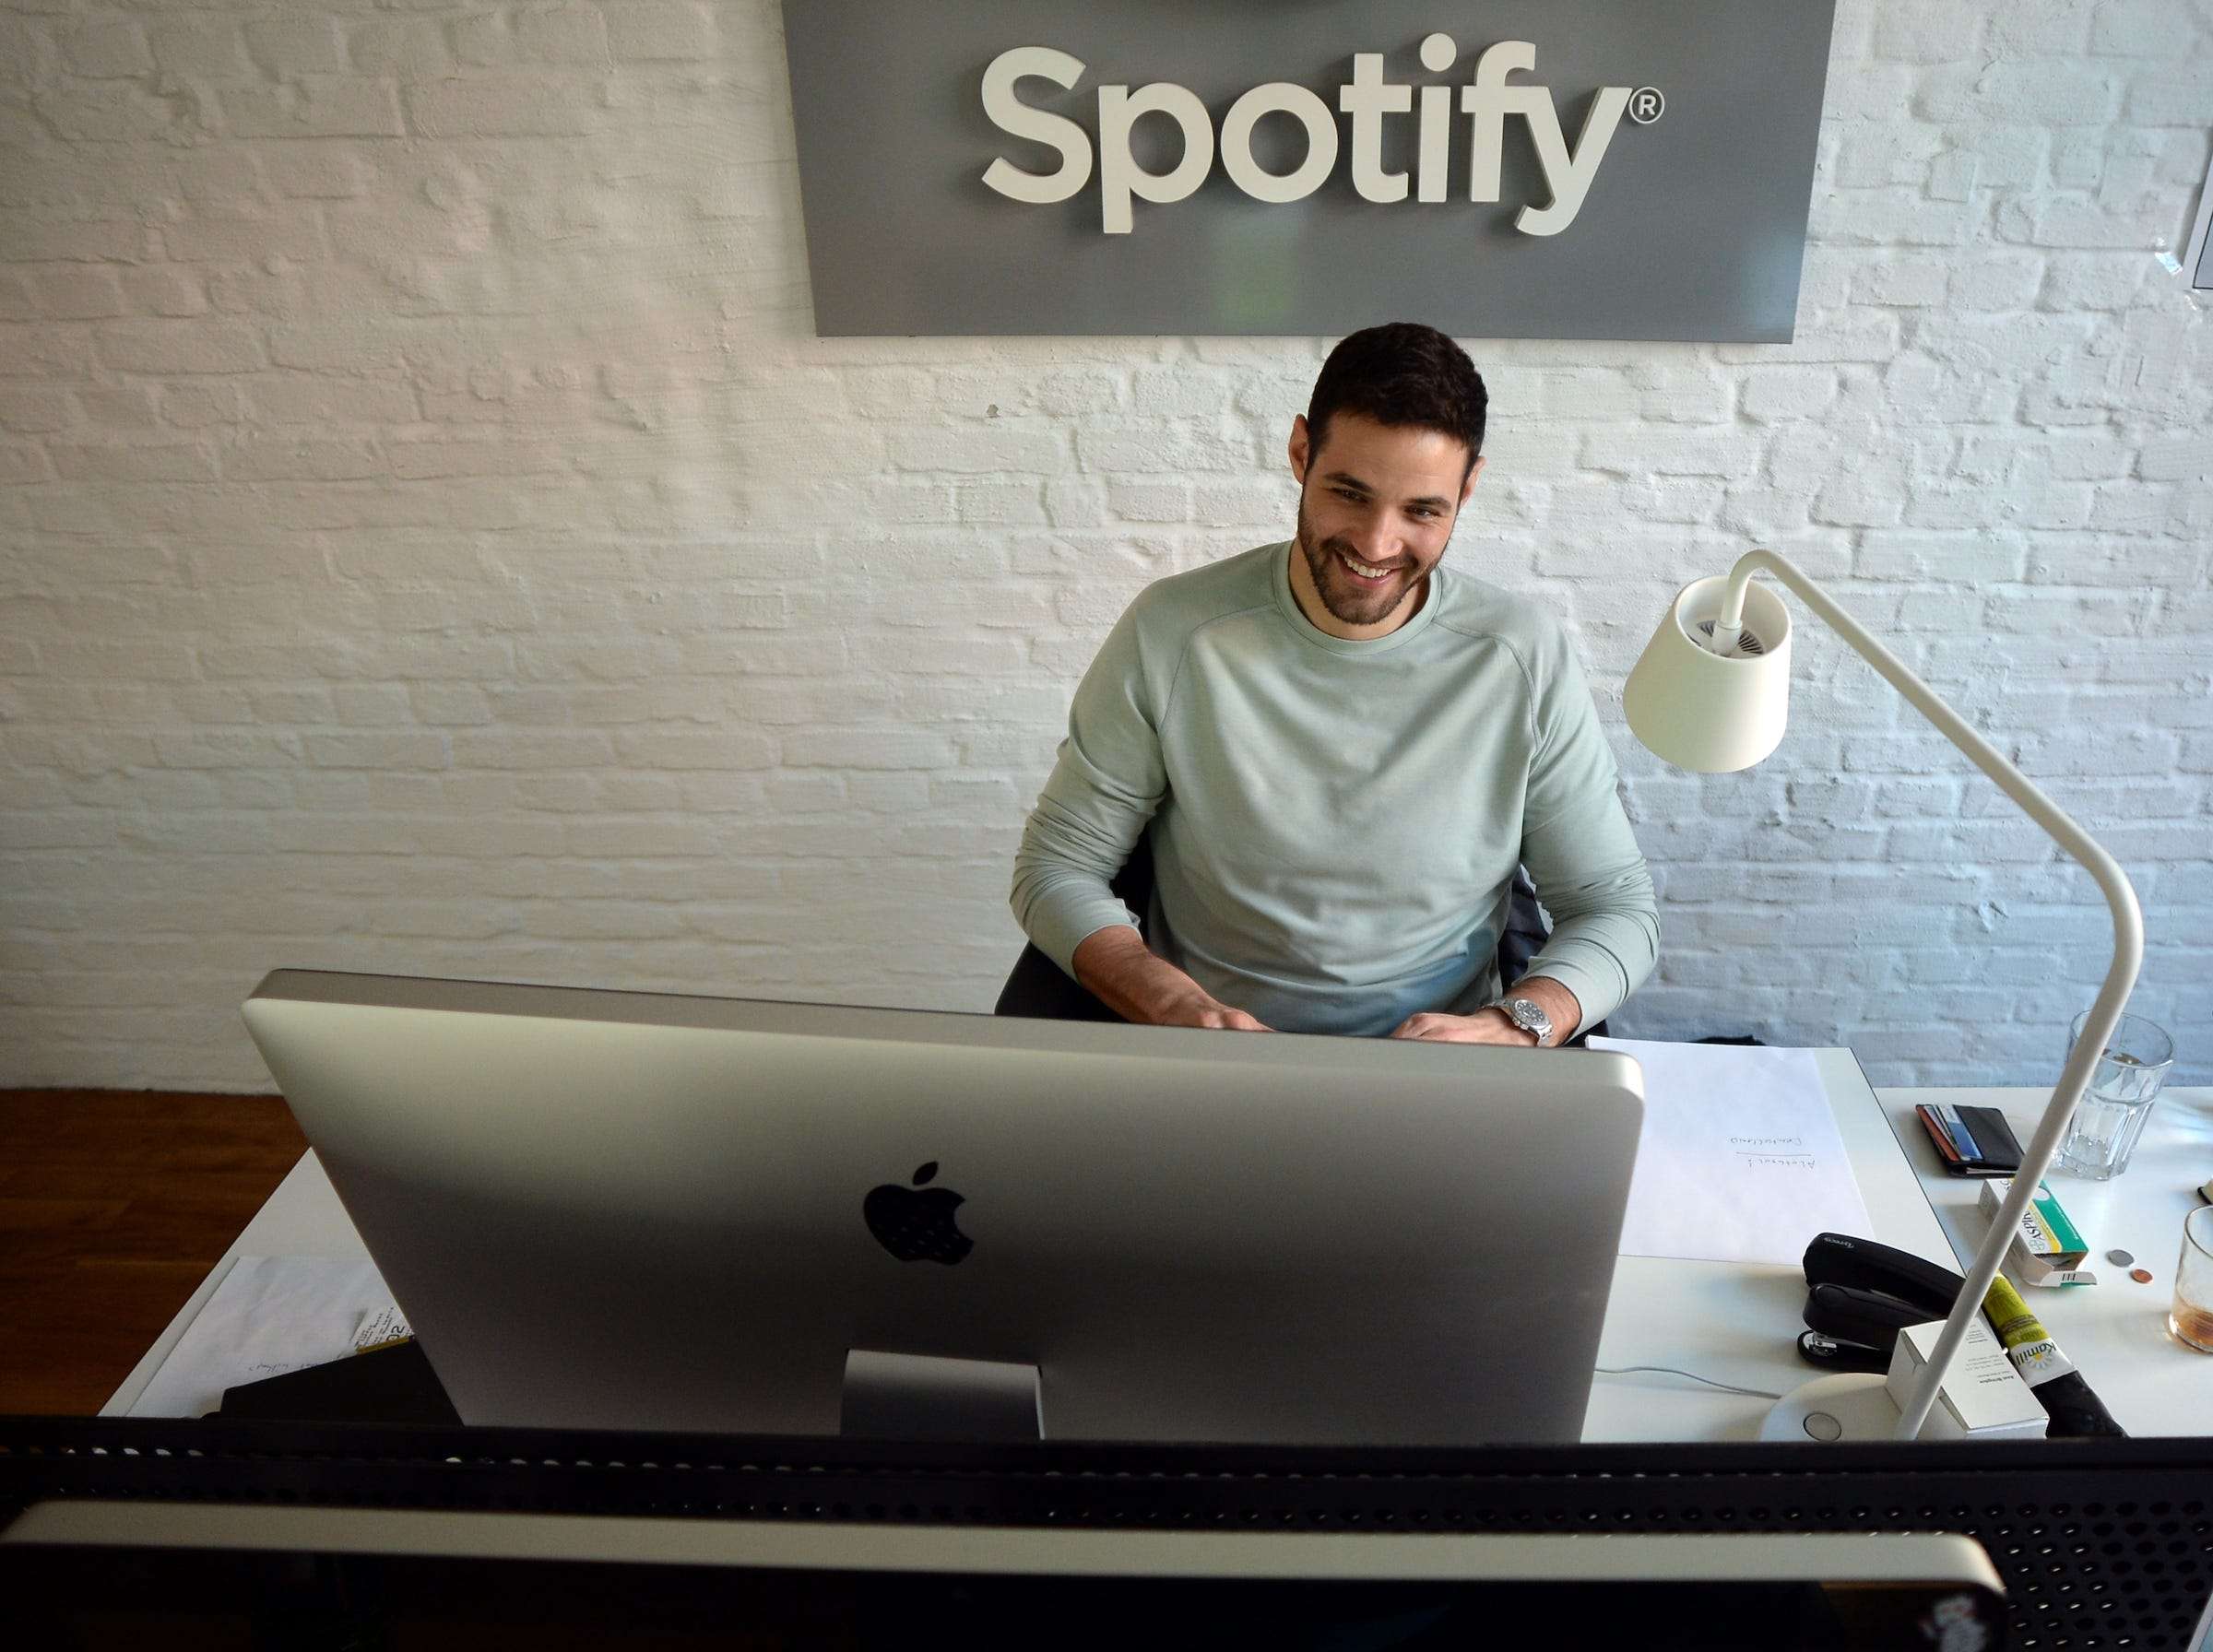 spotify jobs working home